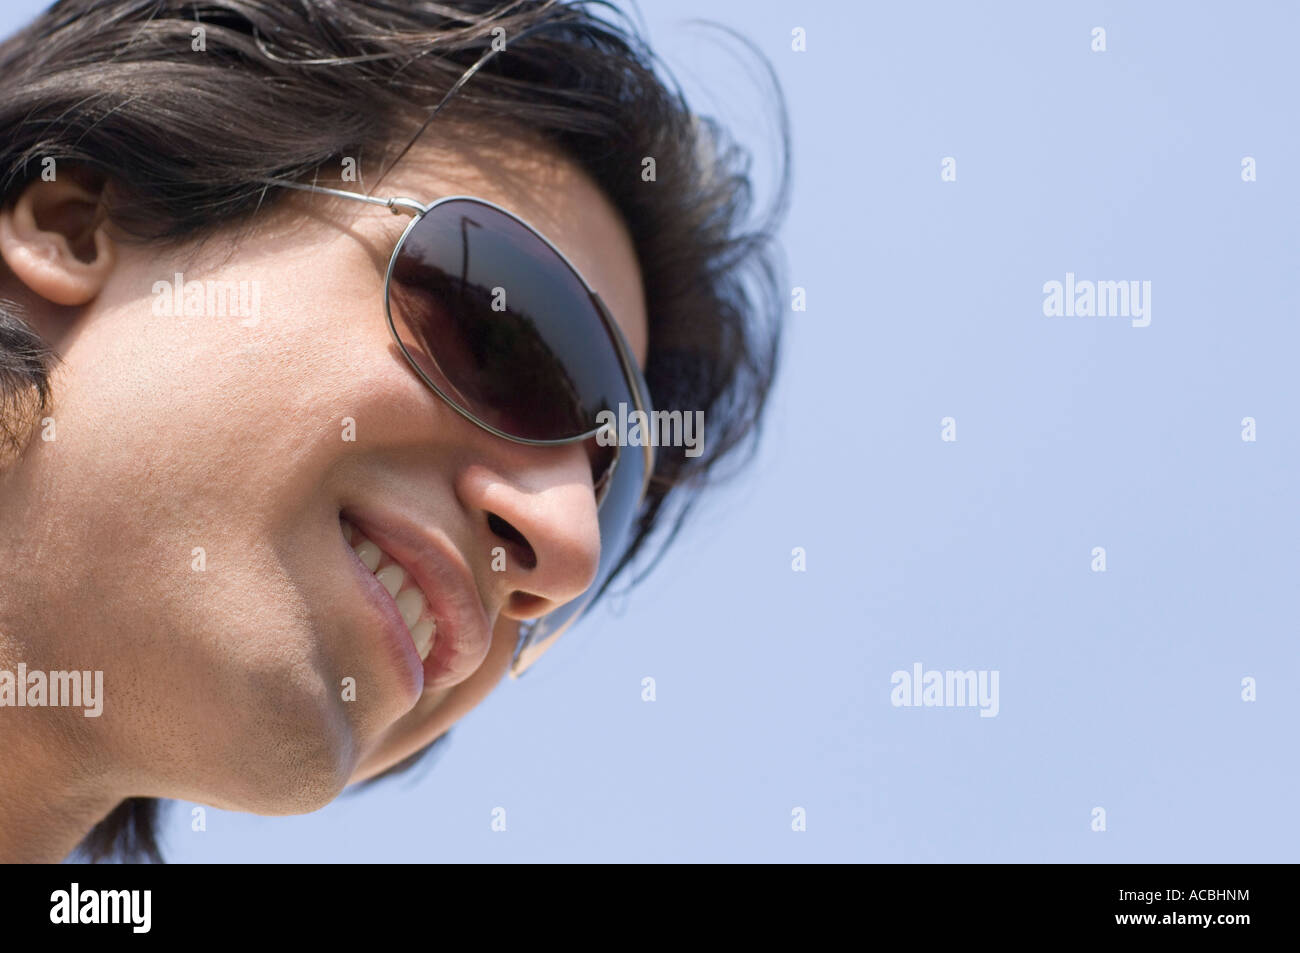 Close-up of a young man wearing sunglasses and smiling Stock Photo